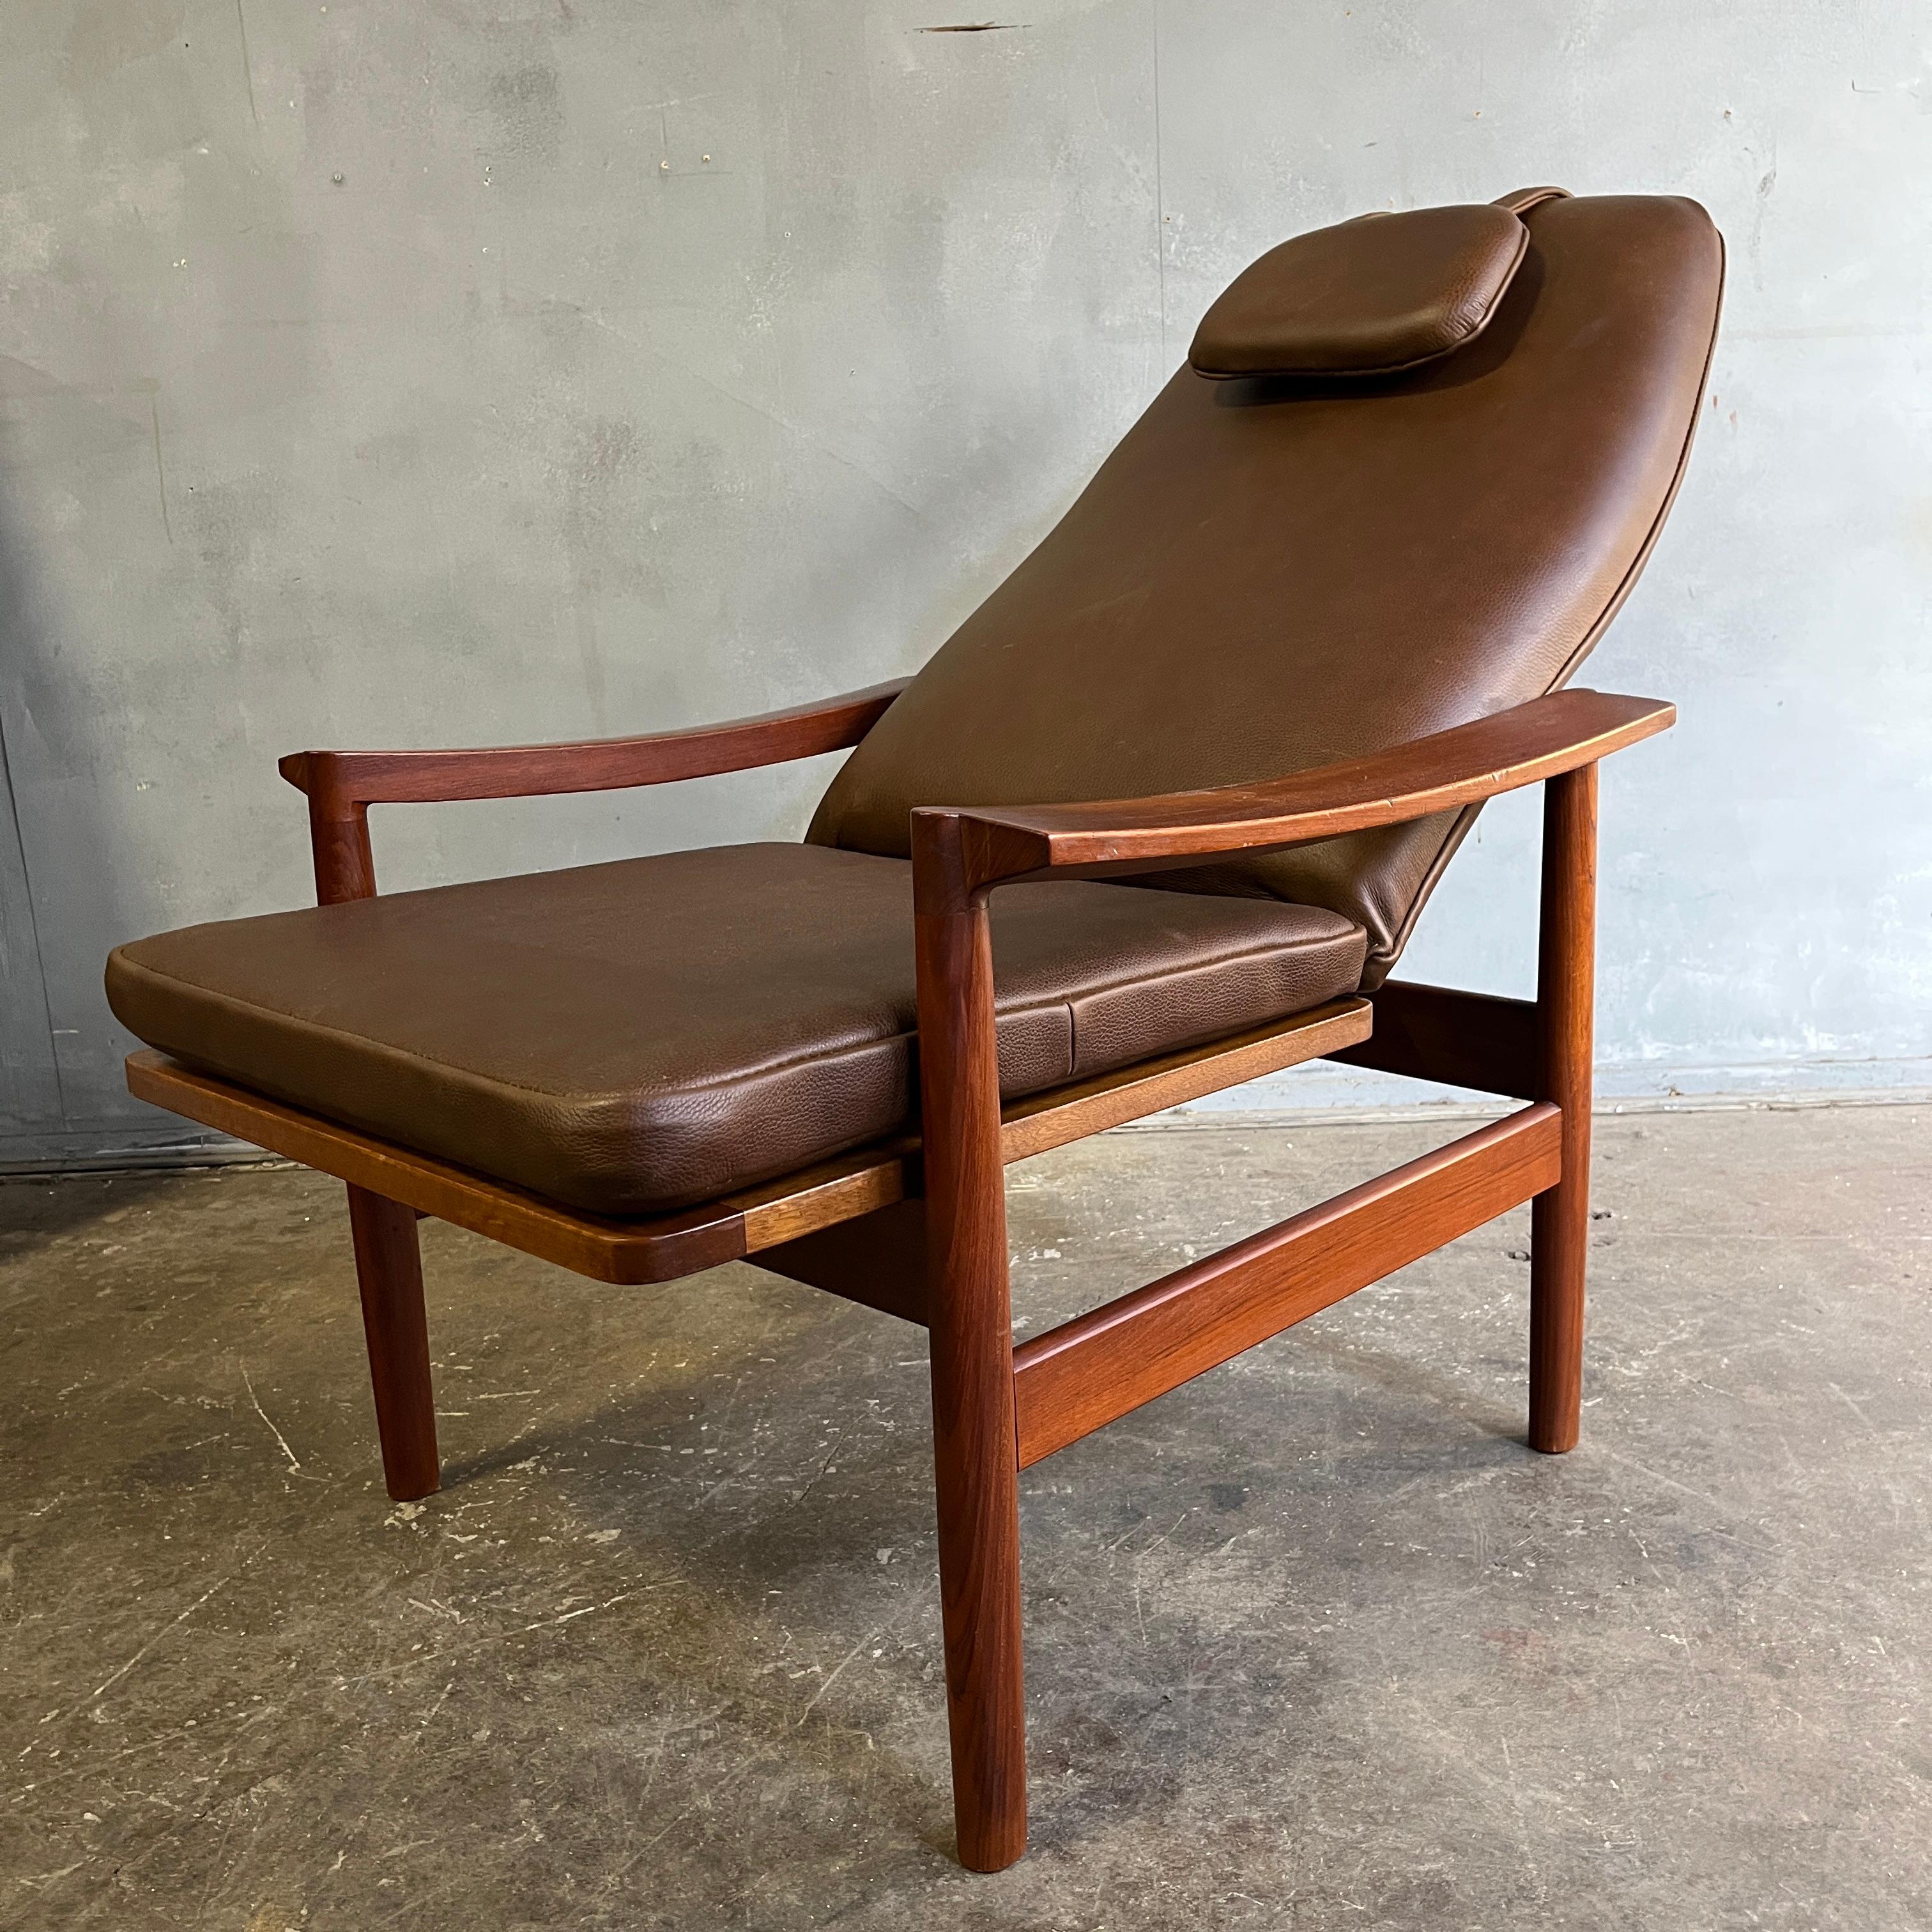 Swedish Midcentury Lounge chair Teak and Leather For Sale